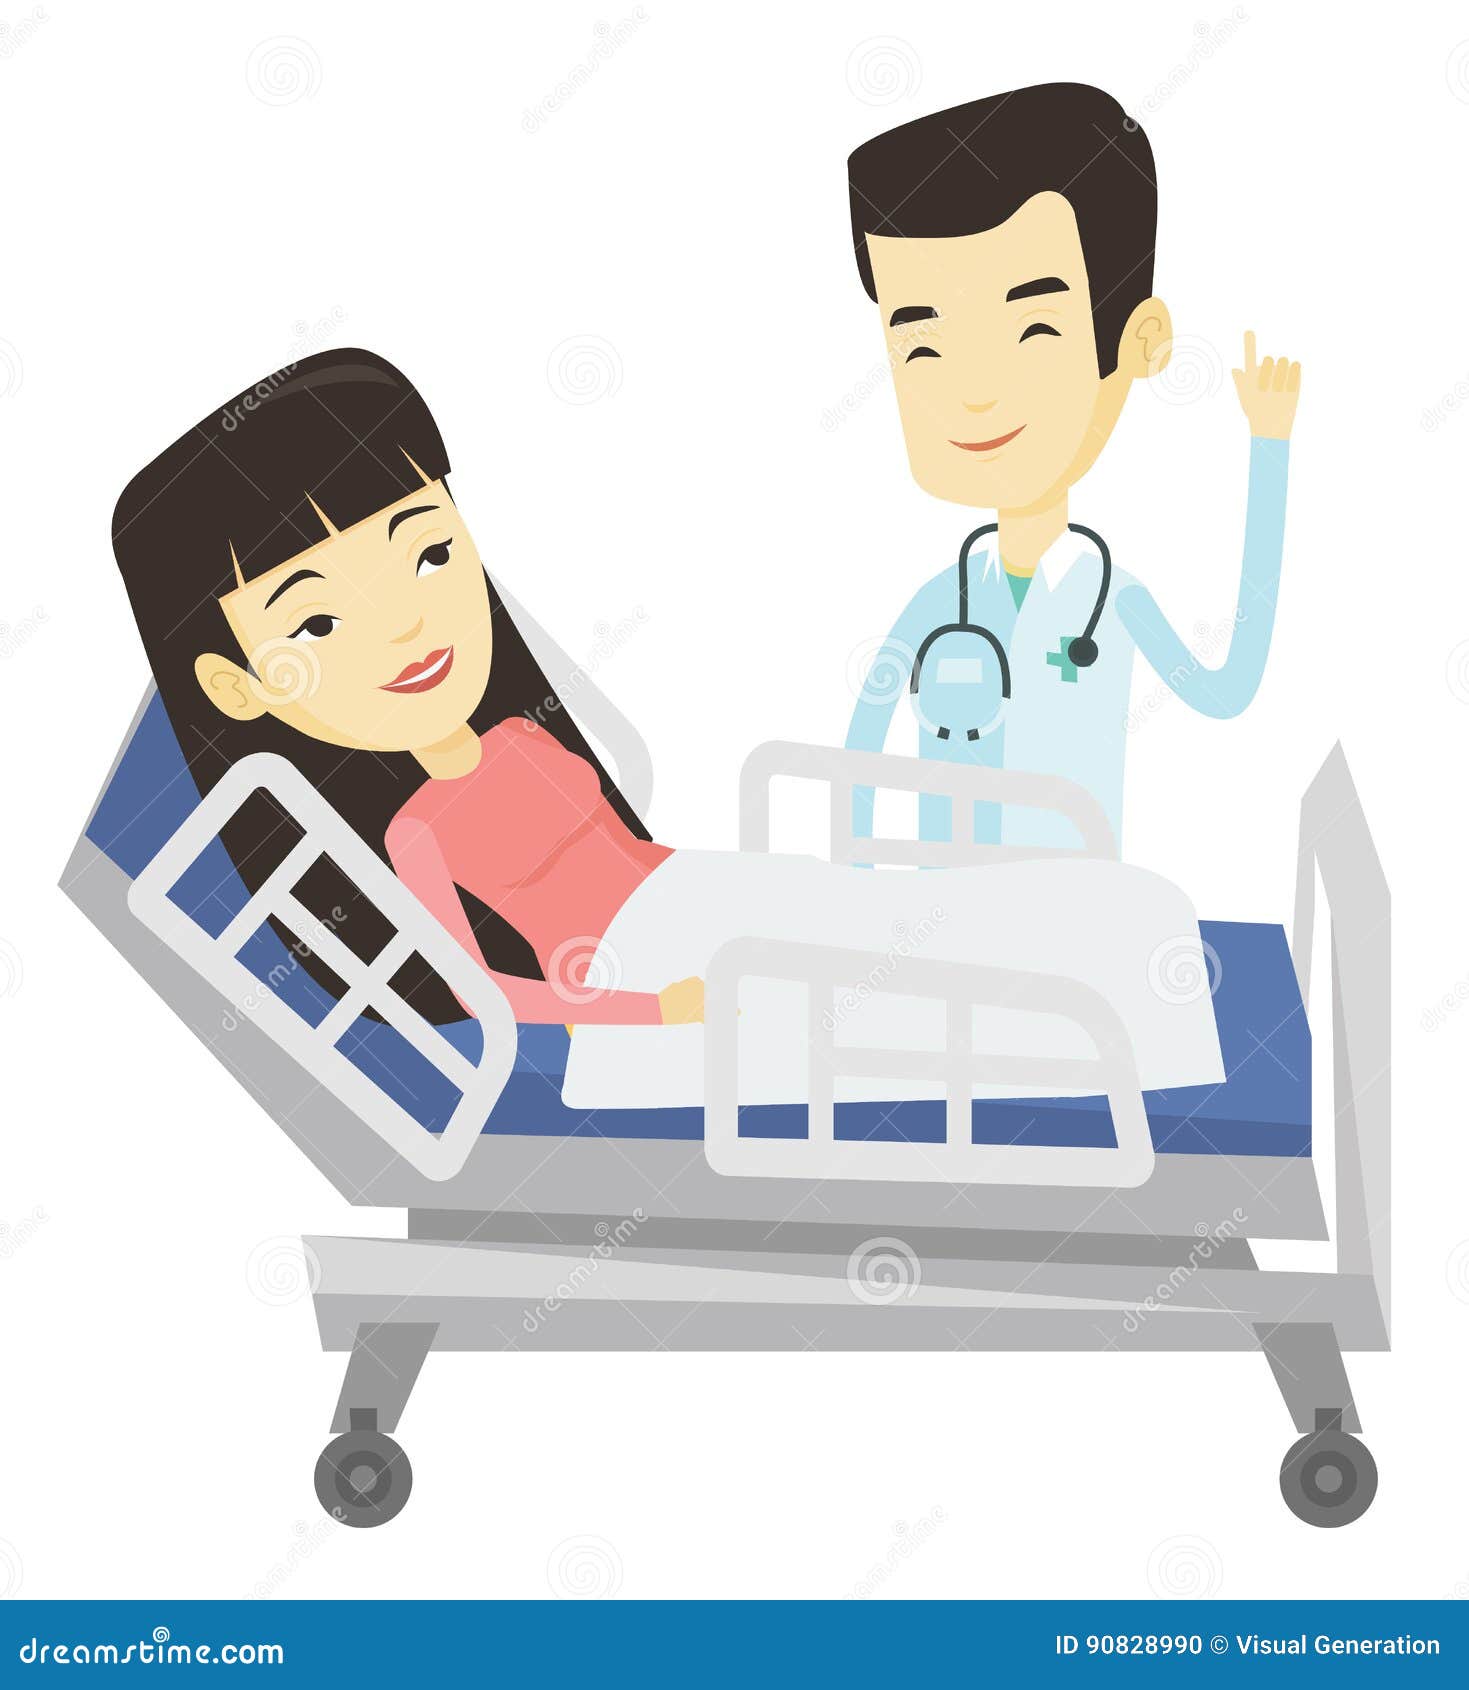 Doctor Visiting Patient Vector Illustration. Stock Vector ...